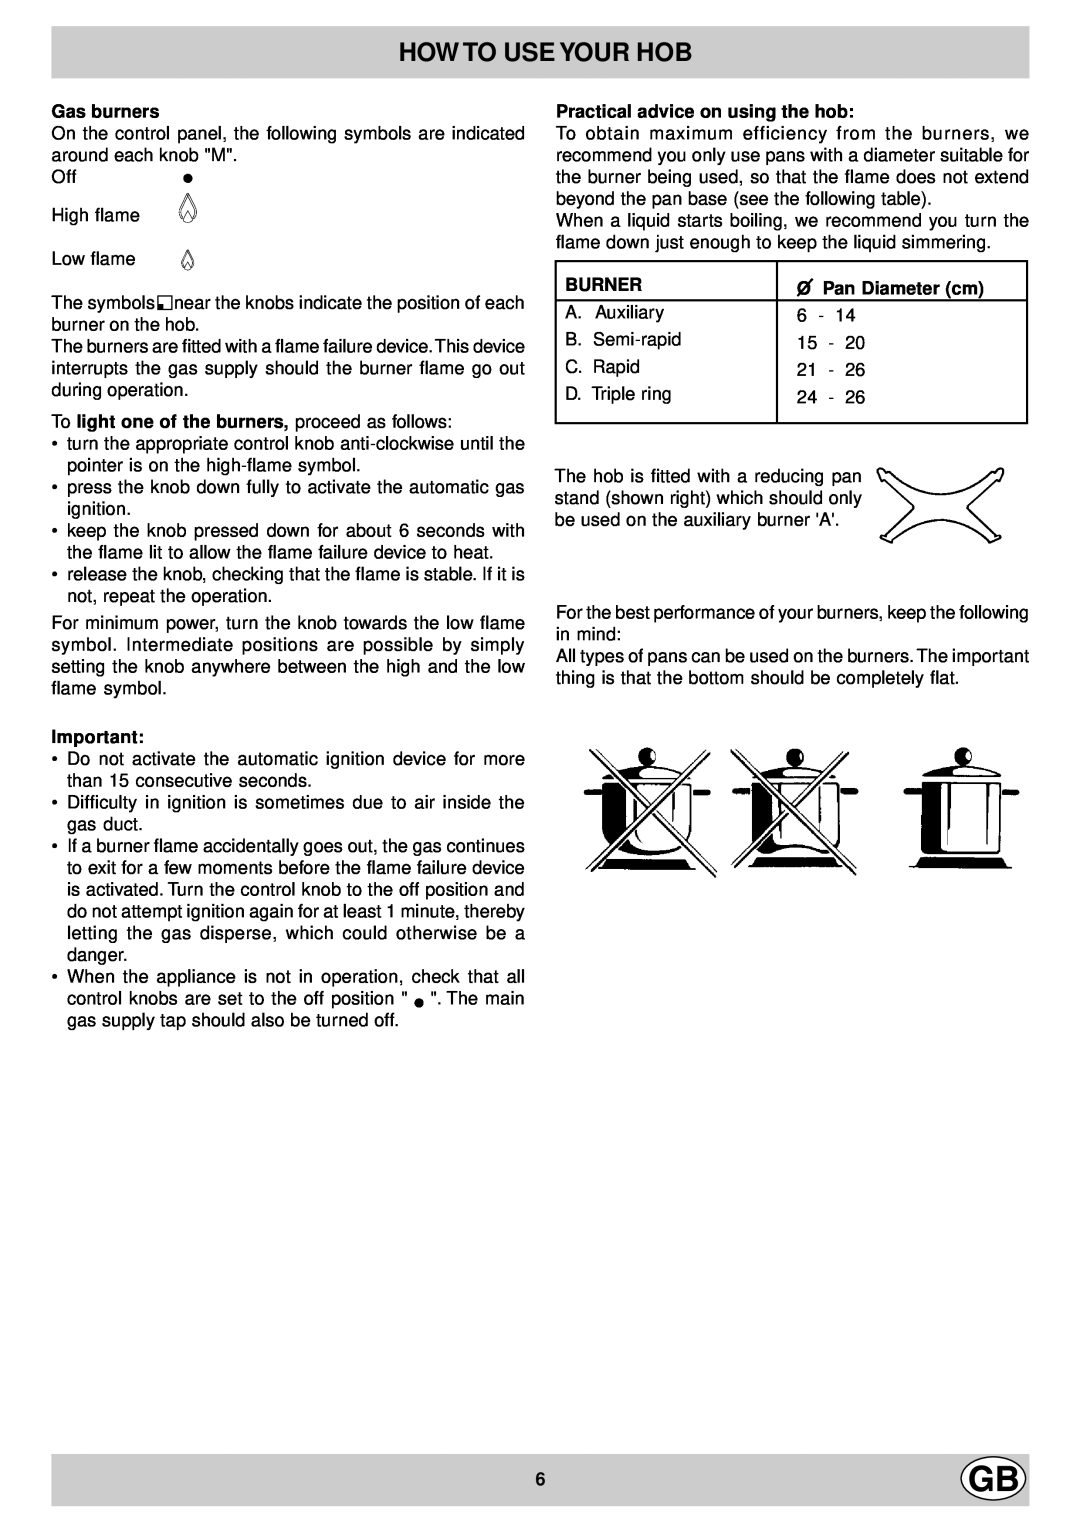 Hotpoint EG900X manual How To Use Your Hob, Gas burners, To light one of the burners, proceed as follows, Burner 